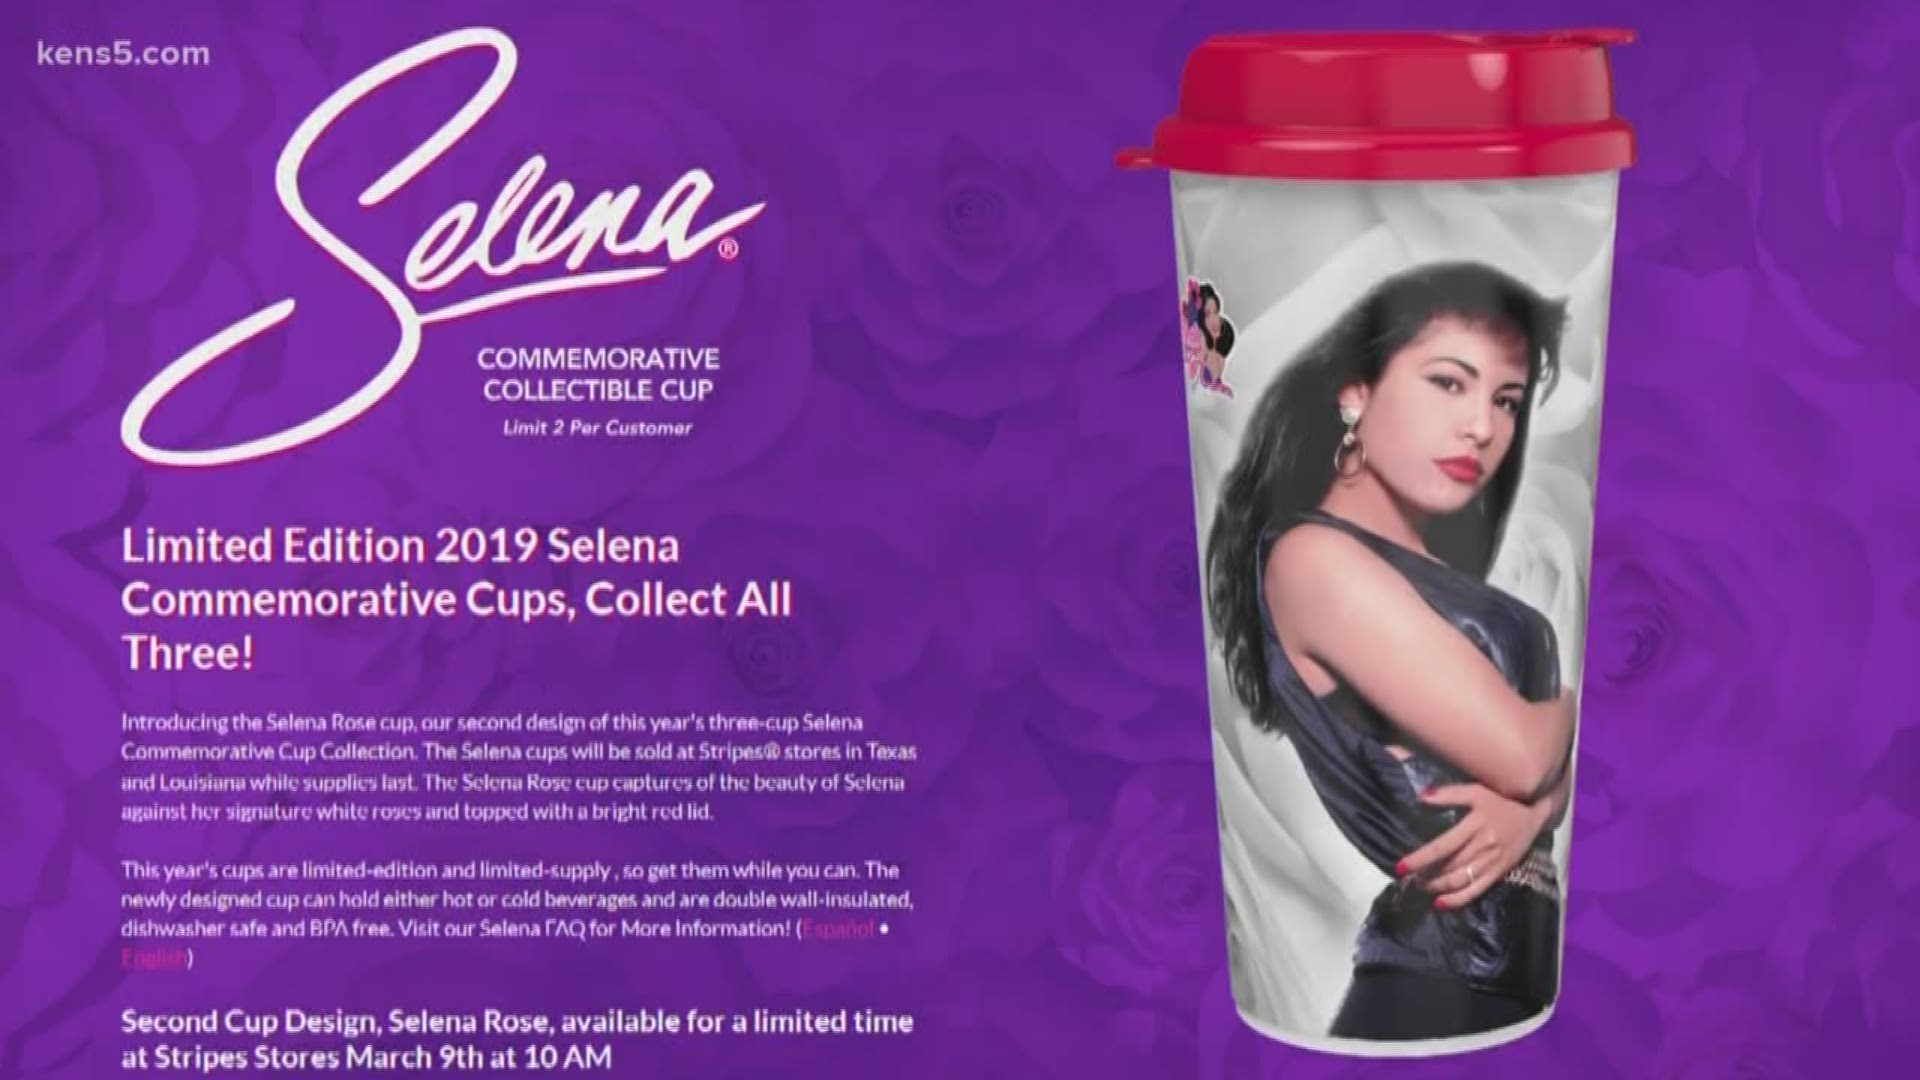 Attention Selena fans! The limited edition 2019 Selena Commemorative Cups go on sale at 10 a.m.